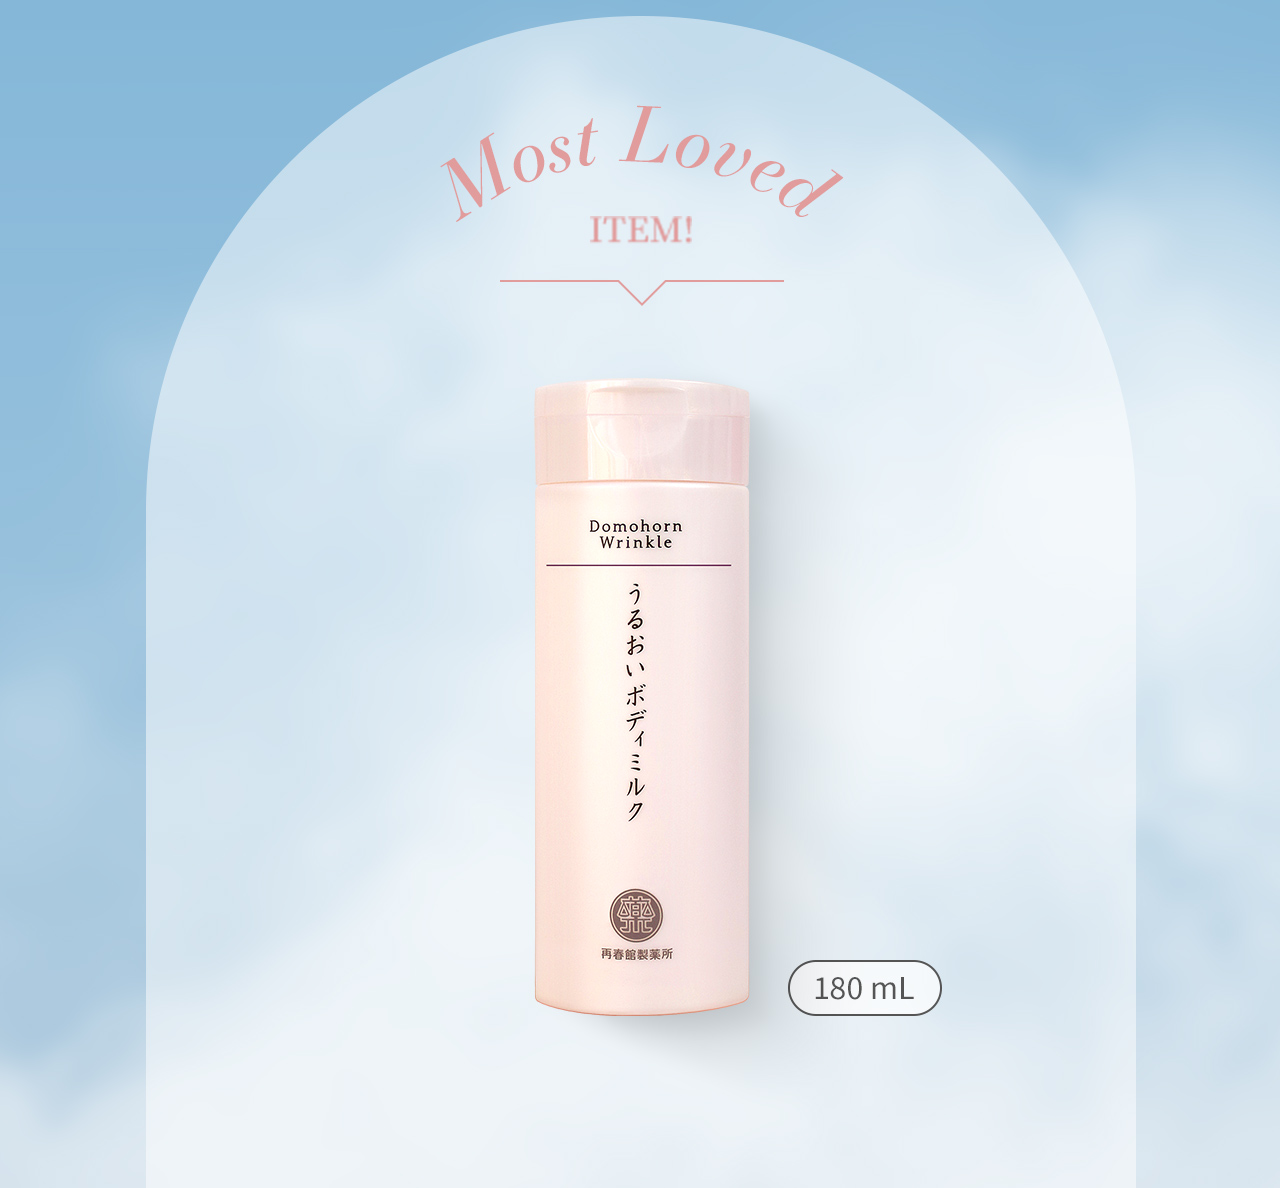 Most Loved ITEM! 180mL